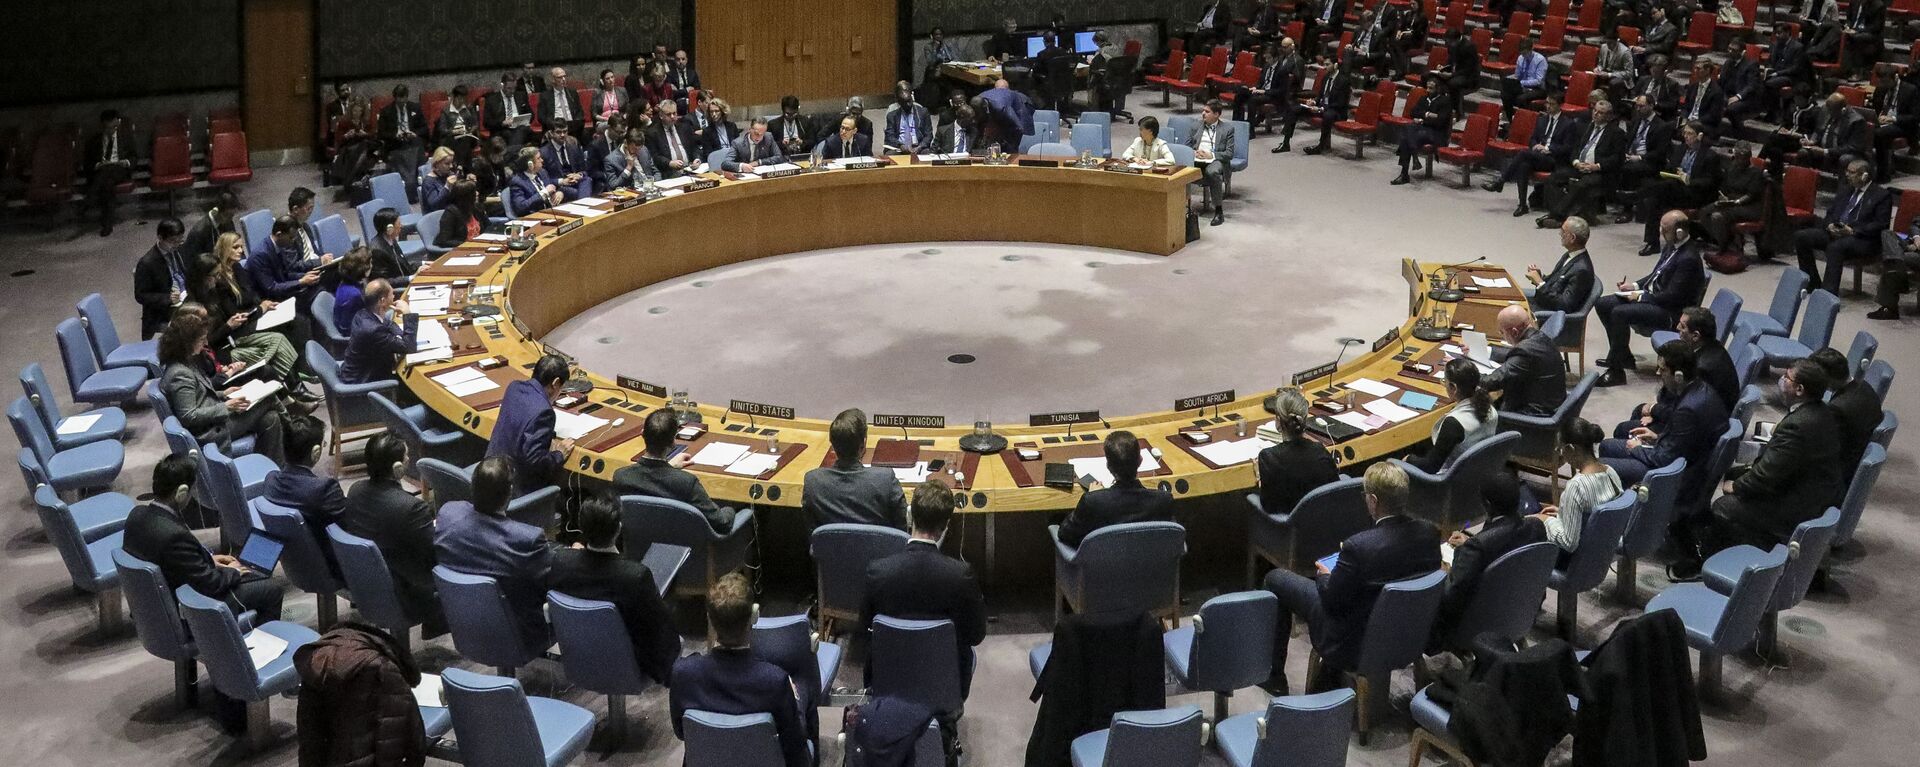 Members of the United Nations Security Council, with visiting German Foreign Minister Heiko Maas, convene a meeting on the nuclear non-proliferation treaty, Wednesday, Feb. 26, 2020, at U.N. headquarters - Sputnik International, 1920, 01.06.2021